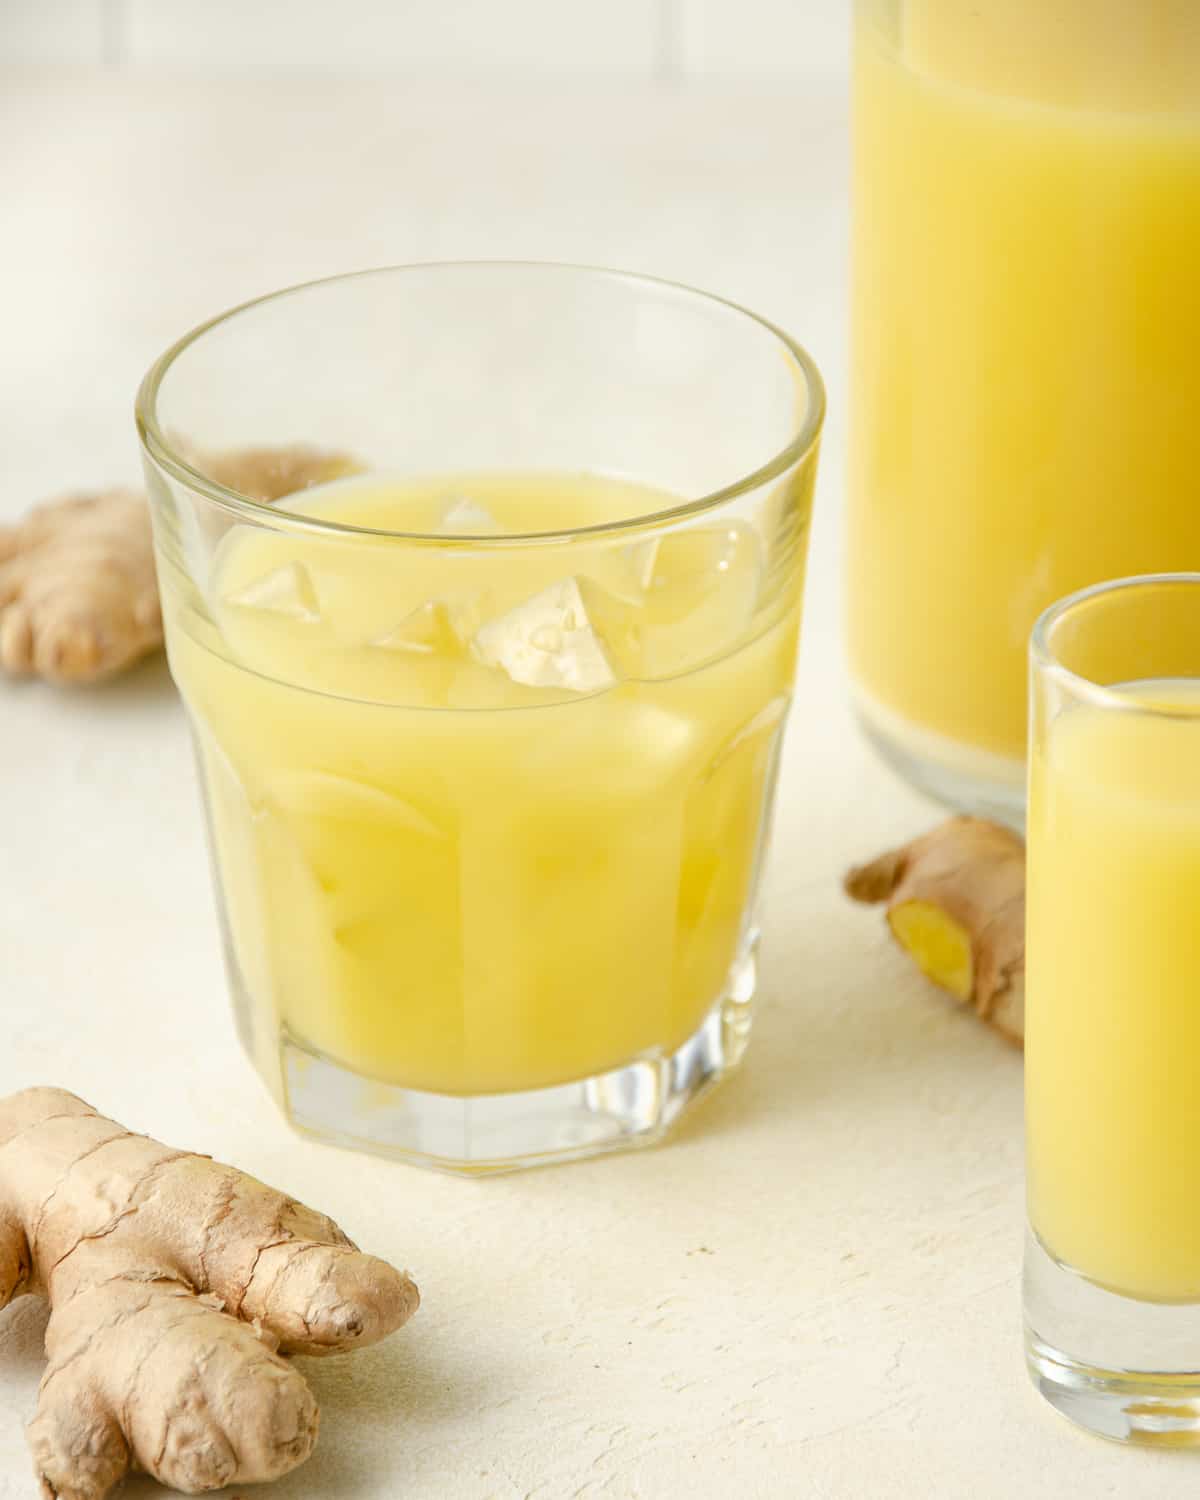 A glass of ginger juice with ice and. More ginger juice and fresh ginger in the background.